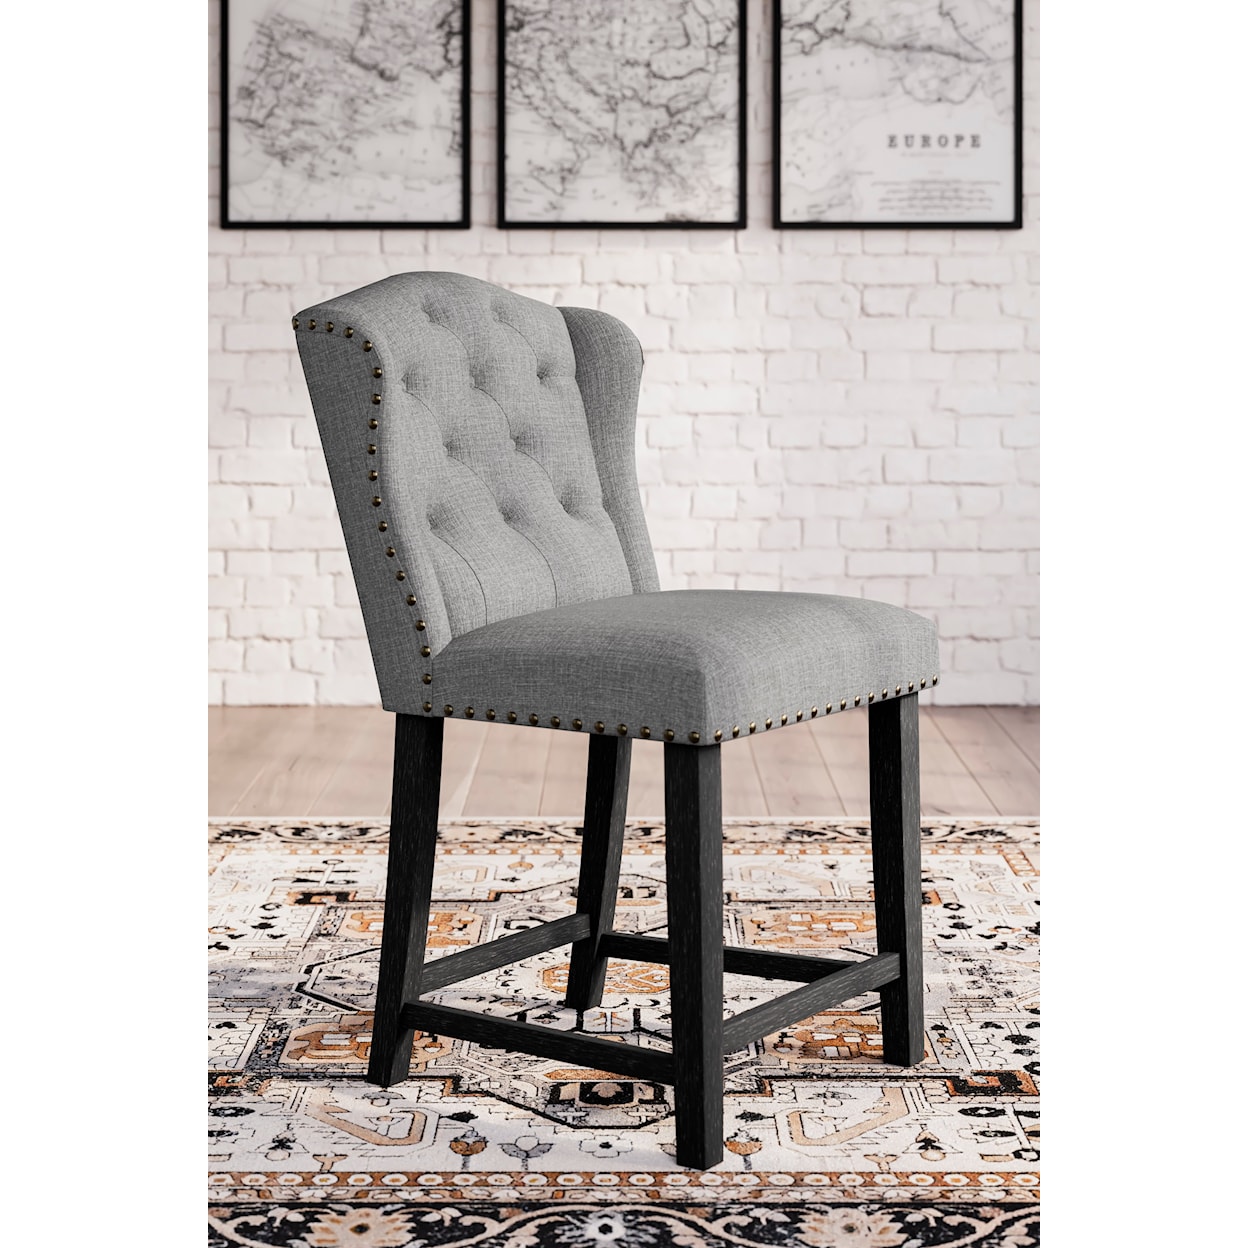 Signature Jeanette Counter Height Bar Stool